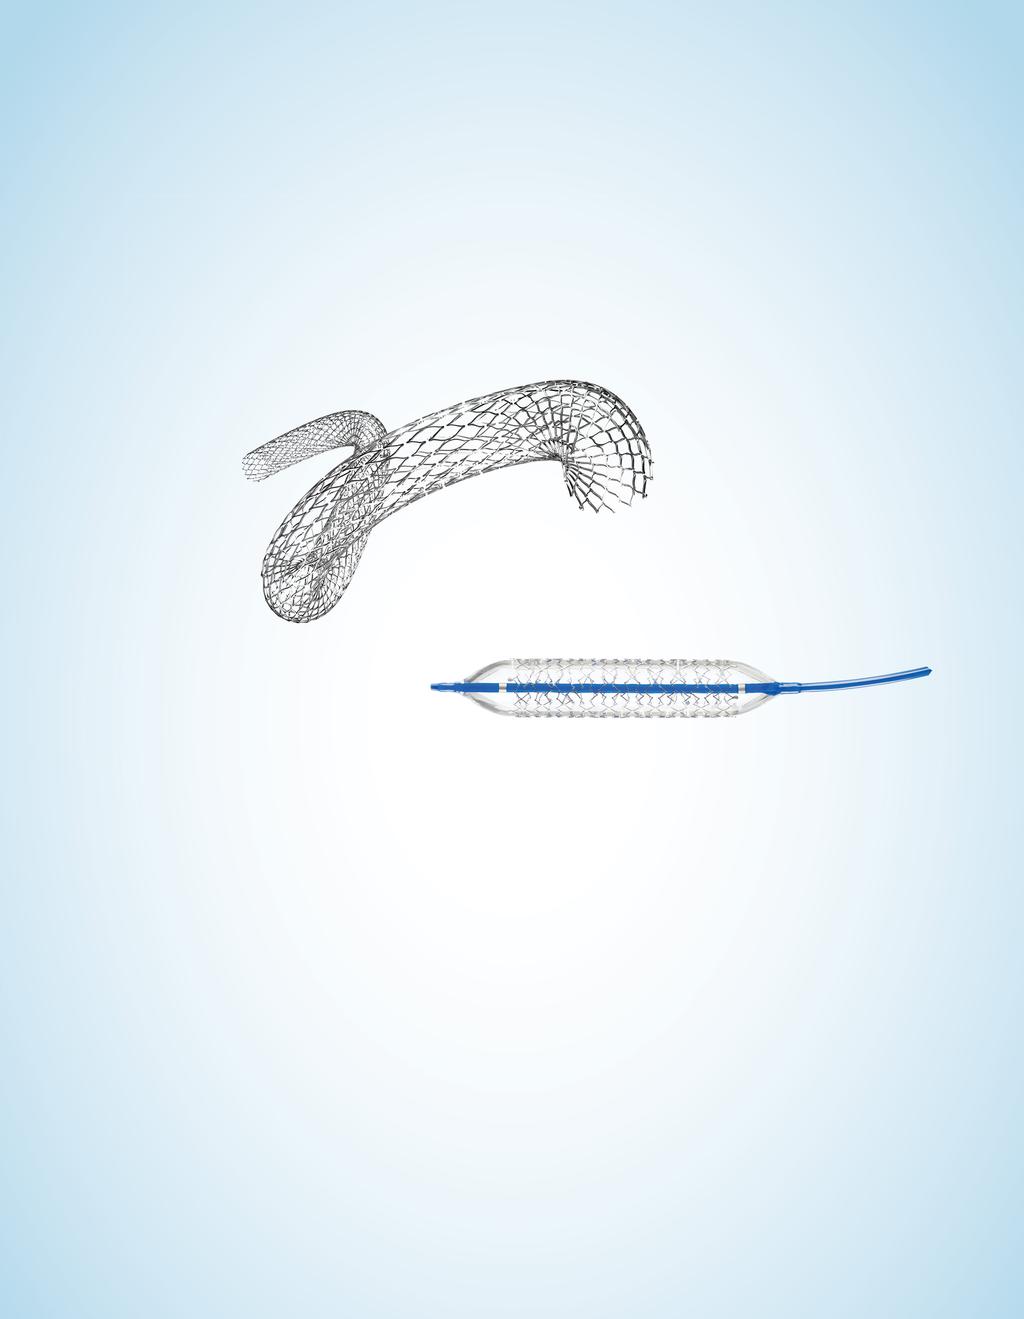 STENTS EverFlex Self-expanding Peripheral Stent System